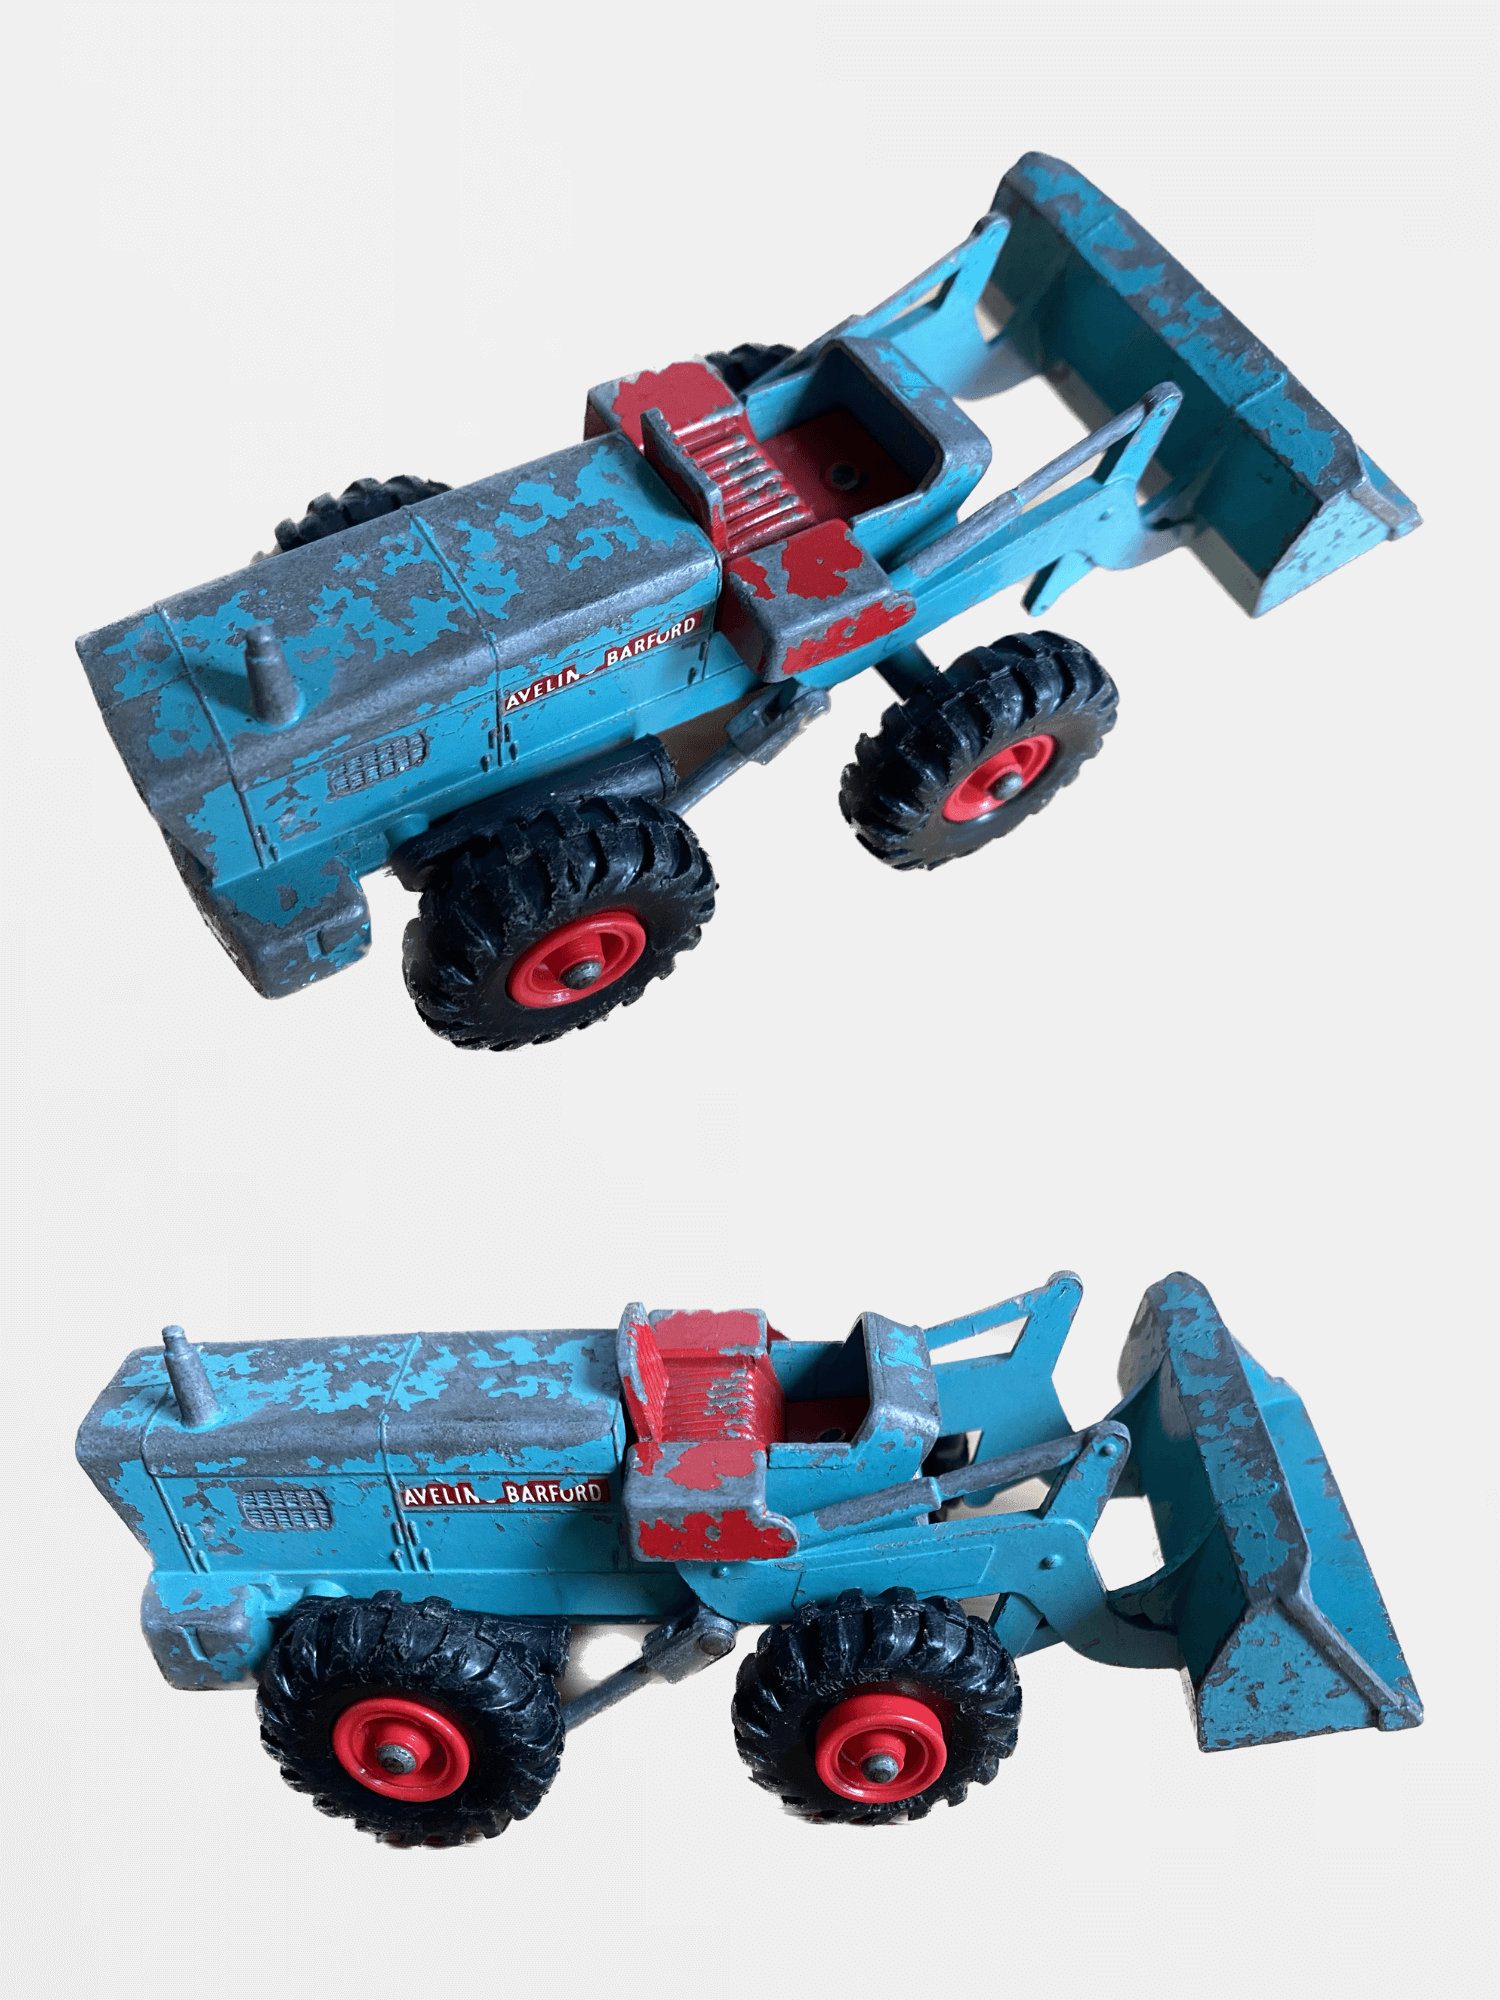 MATCHBOX AVELING-BARFORD TRACTOR SHOVEL Vintage Original Collectors c1970s K-10 Diecast Model Toy Car MADE IN ENGLAND BY LESNEY King Size No. 10 Series Collectible Classic Toys Cars Tractors Collection in Teal blue